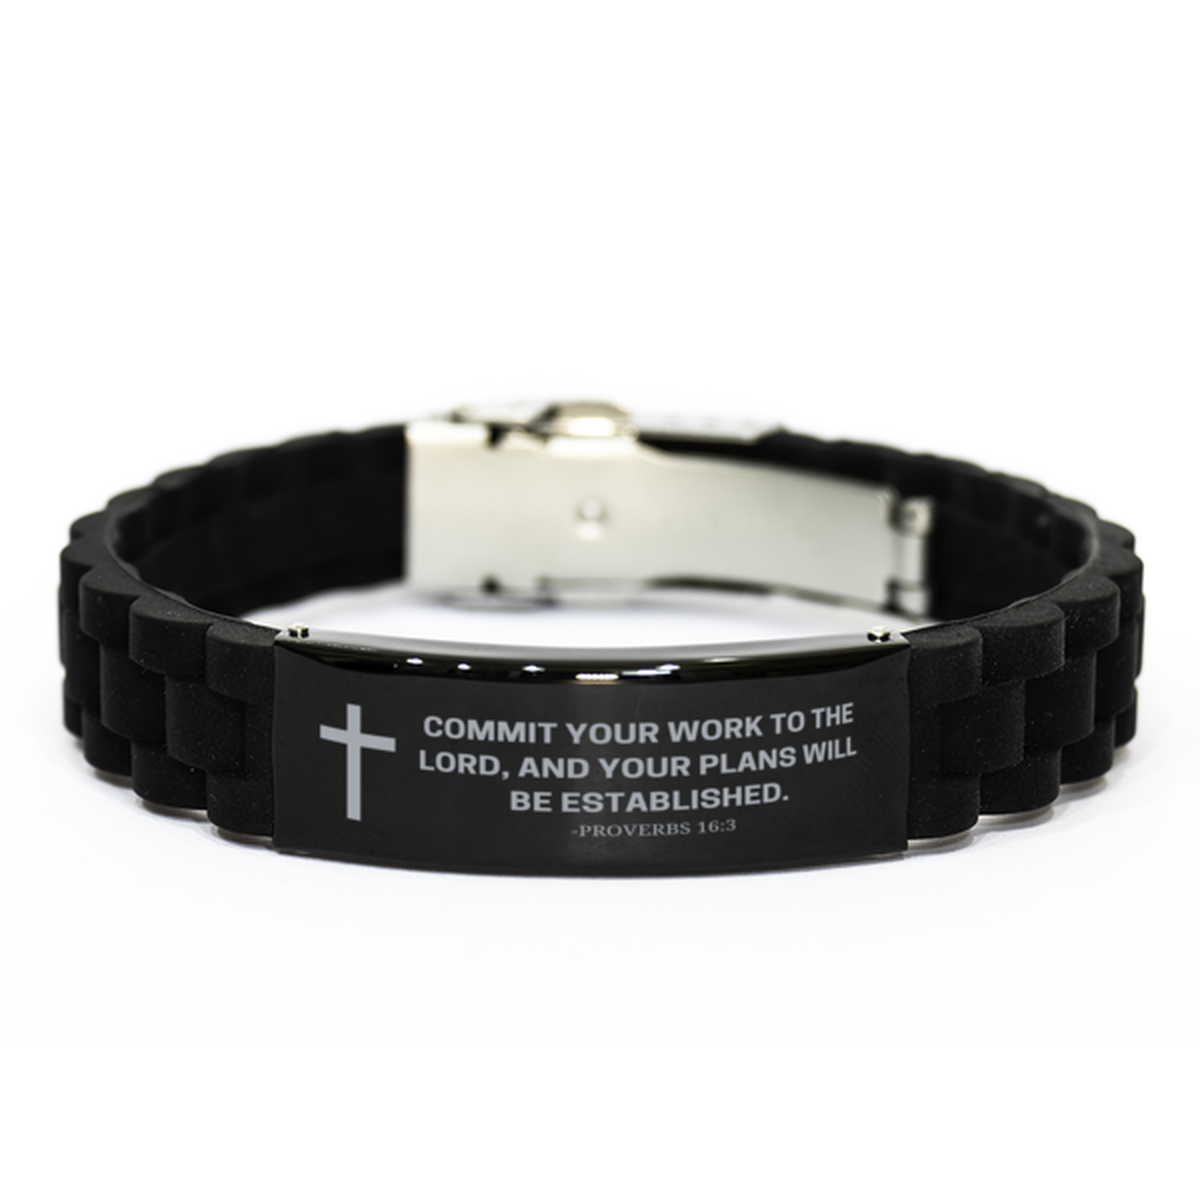 Baptism Gifts For Teenage Boys Girls, Christian Bible Verse Black Glidelock Clasp Bracelet, Commit your work to the Lord, Catholic Confirmation Gifts for Son, Godson, Grandson, Nephew